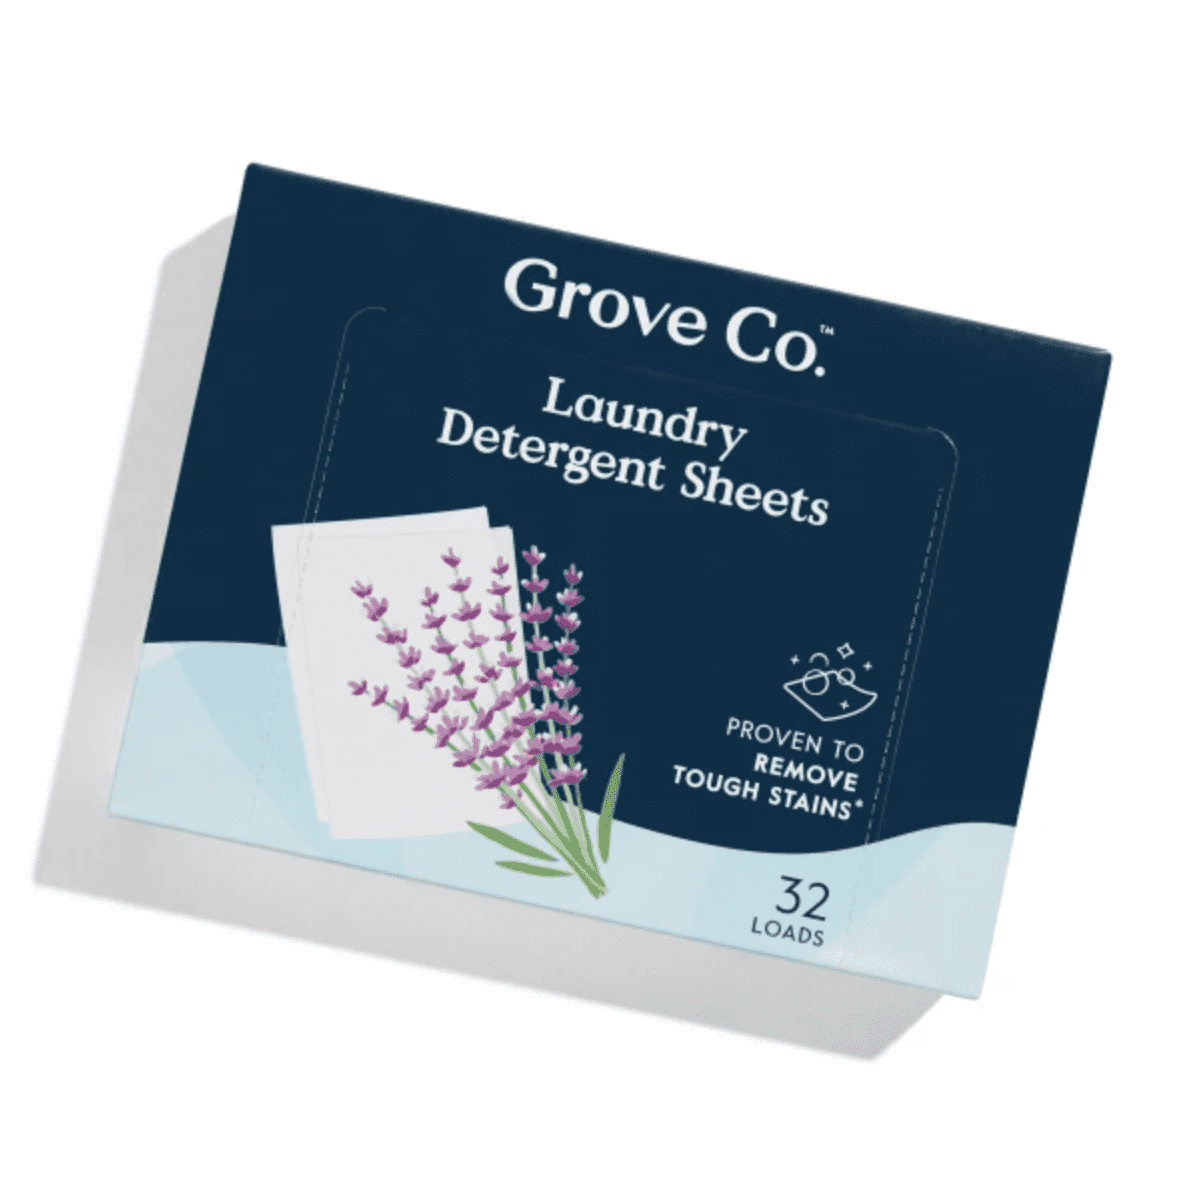 http://cdn.apartmenttherapy.info/image/upload/v1625778014/at/product%20listing/Grove_Co_Laundry_Detergent_Sheets.png